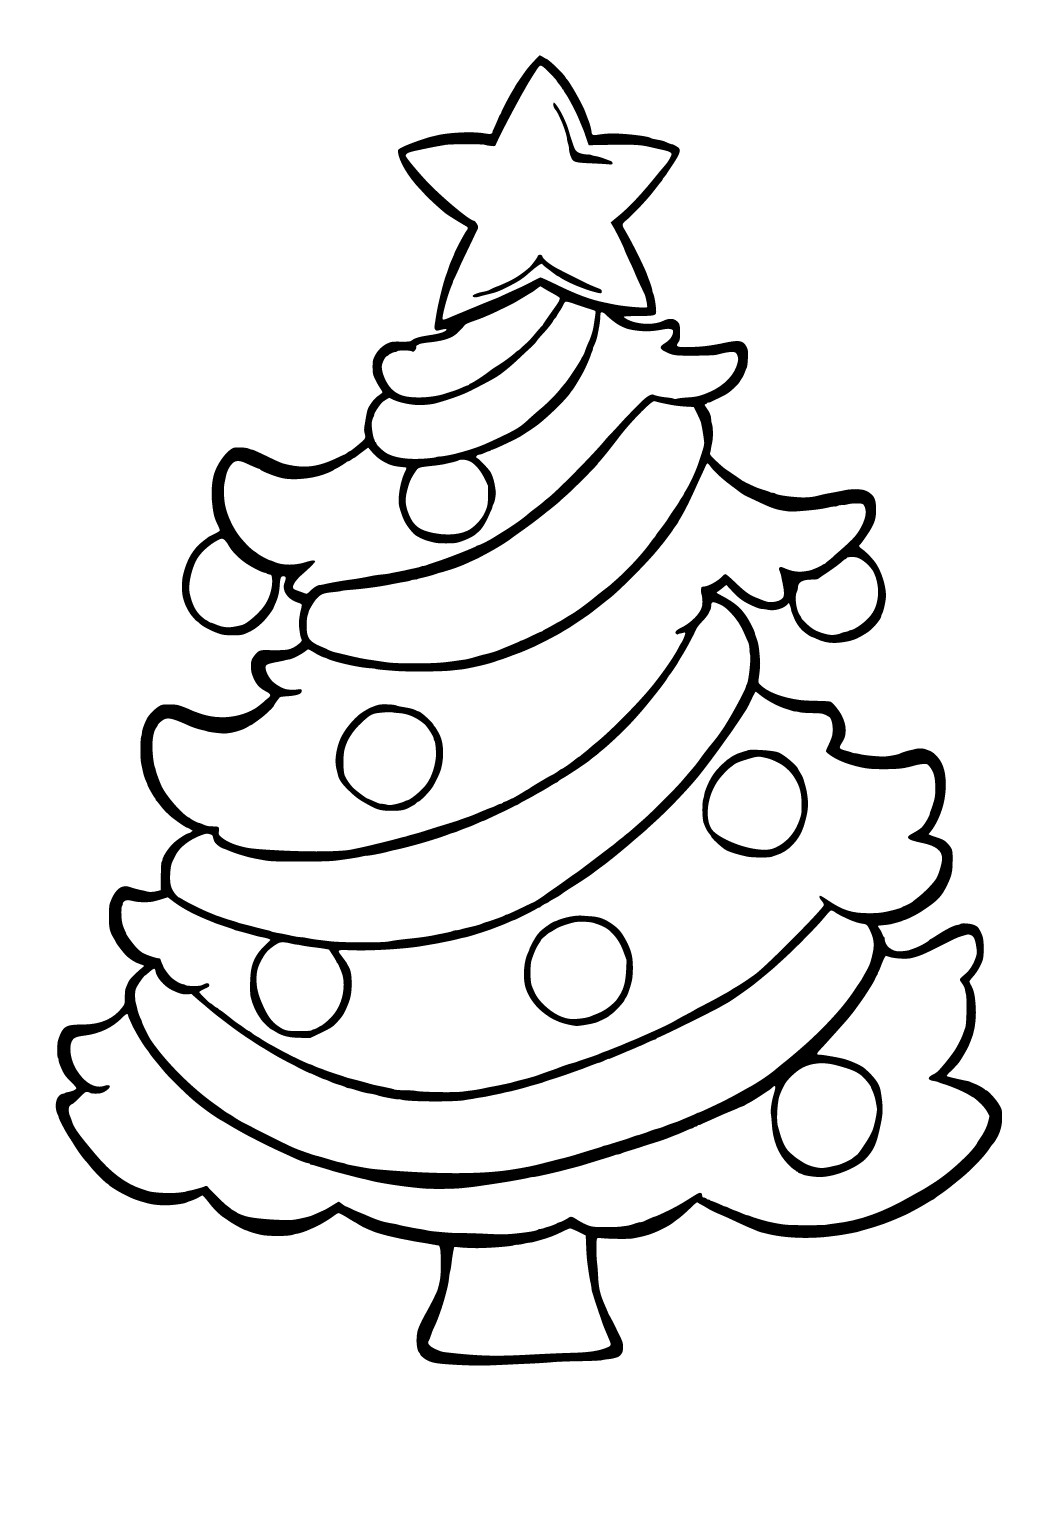 Free printable christmas tree easy coloring page sheet and picture for adults and kids girls and boys